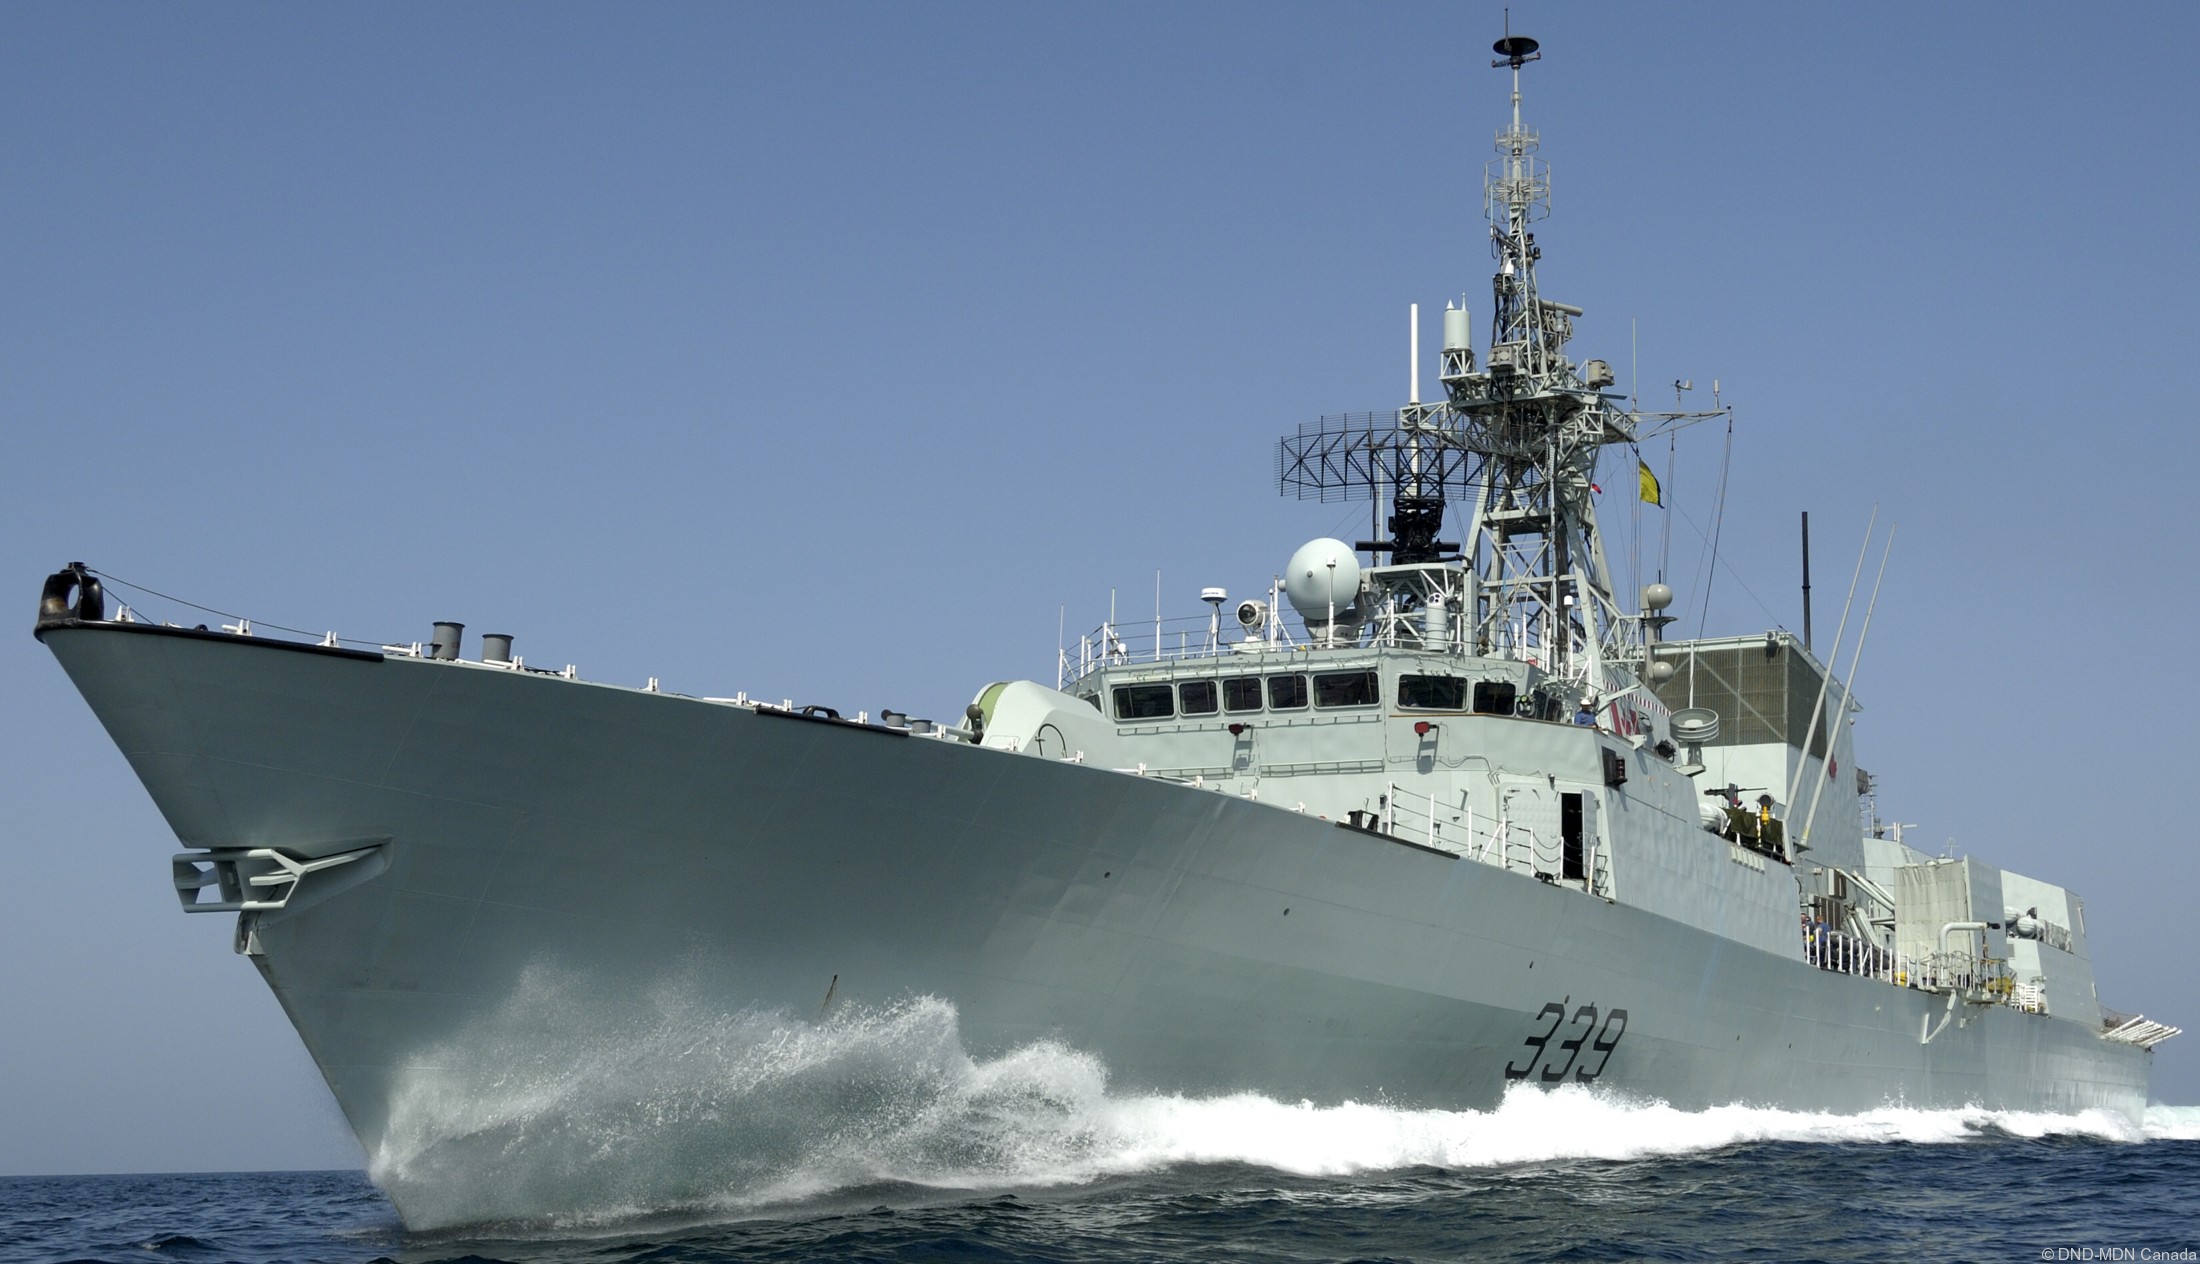 ffh-339 hmcs charlottetown halifax class helicopter patrol frigate ncsm royal canadian navy 39